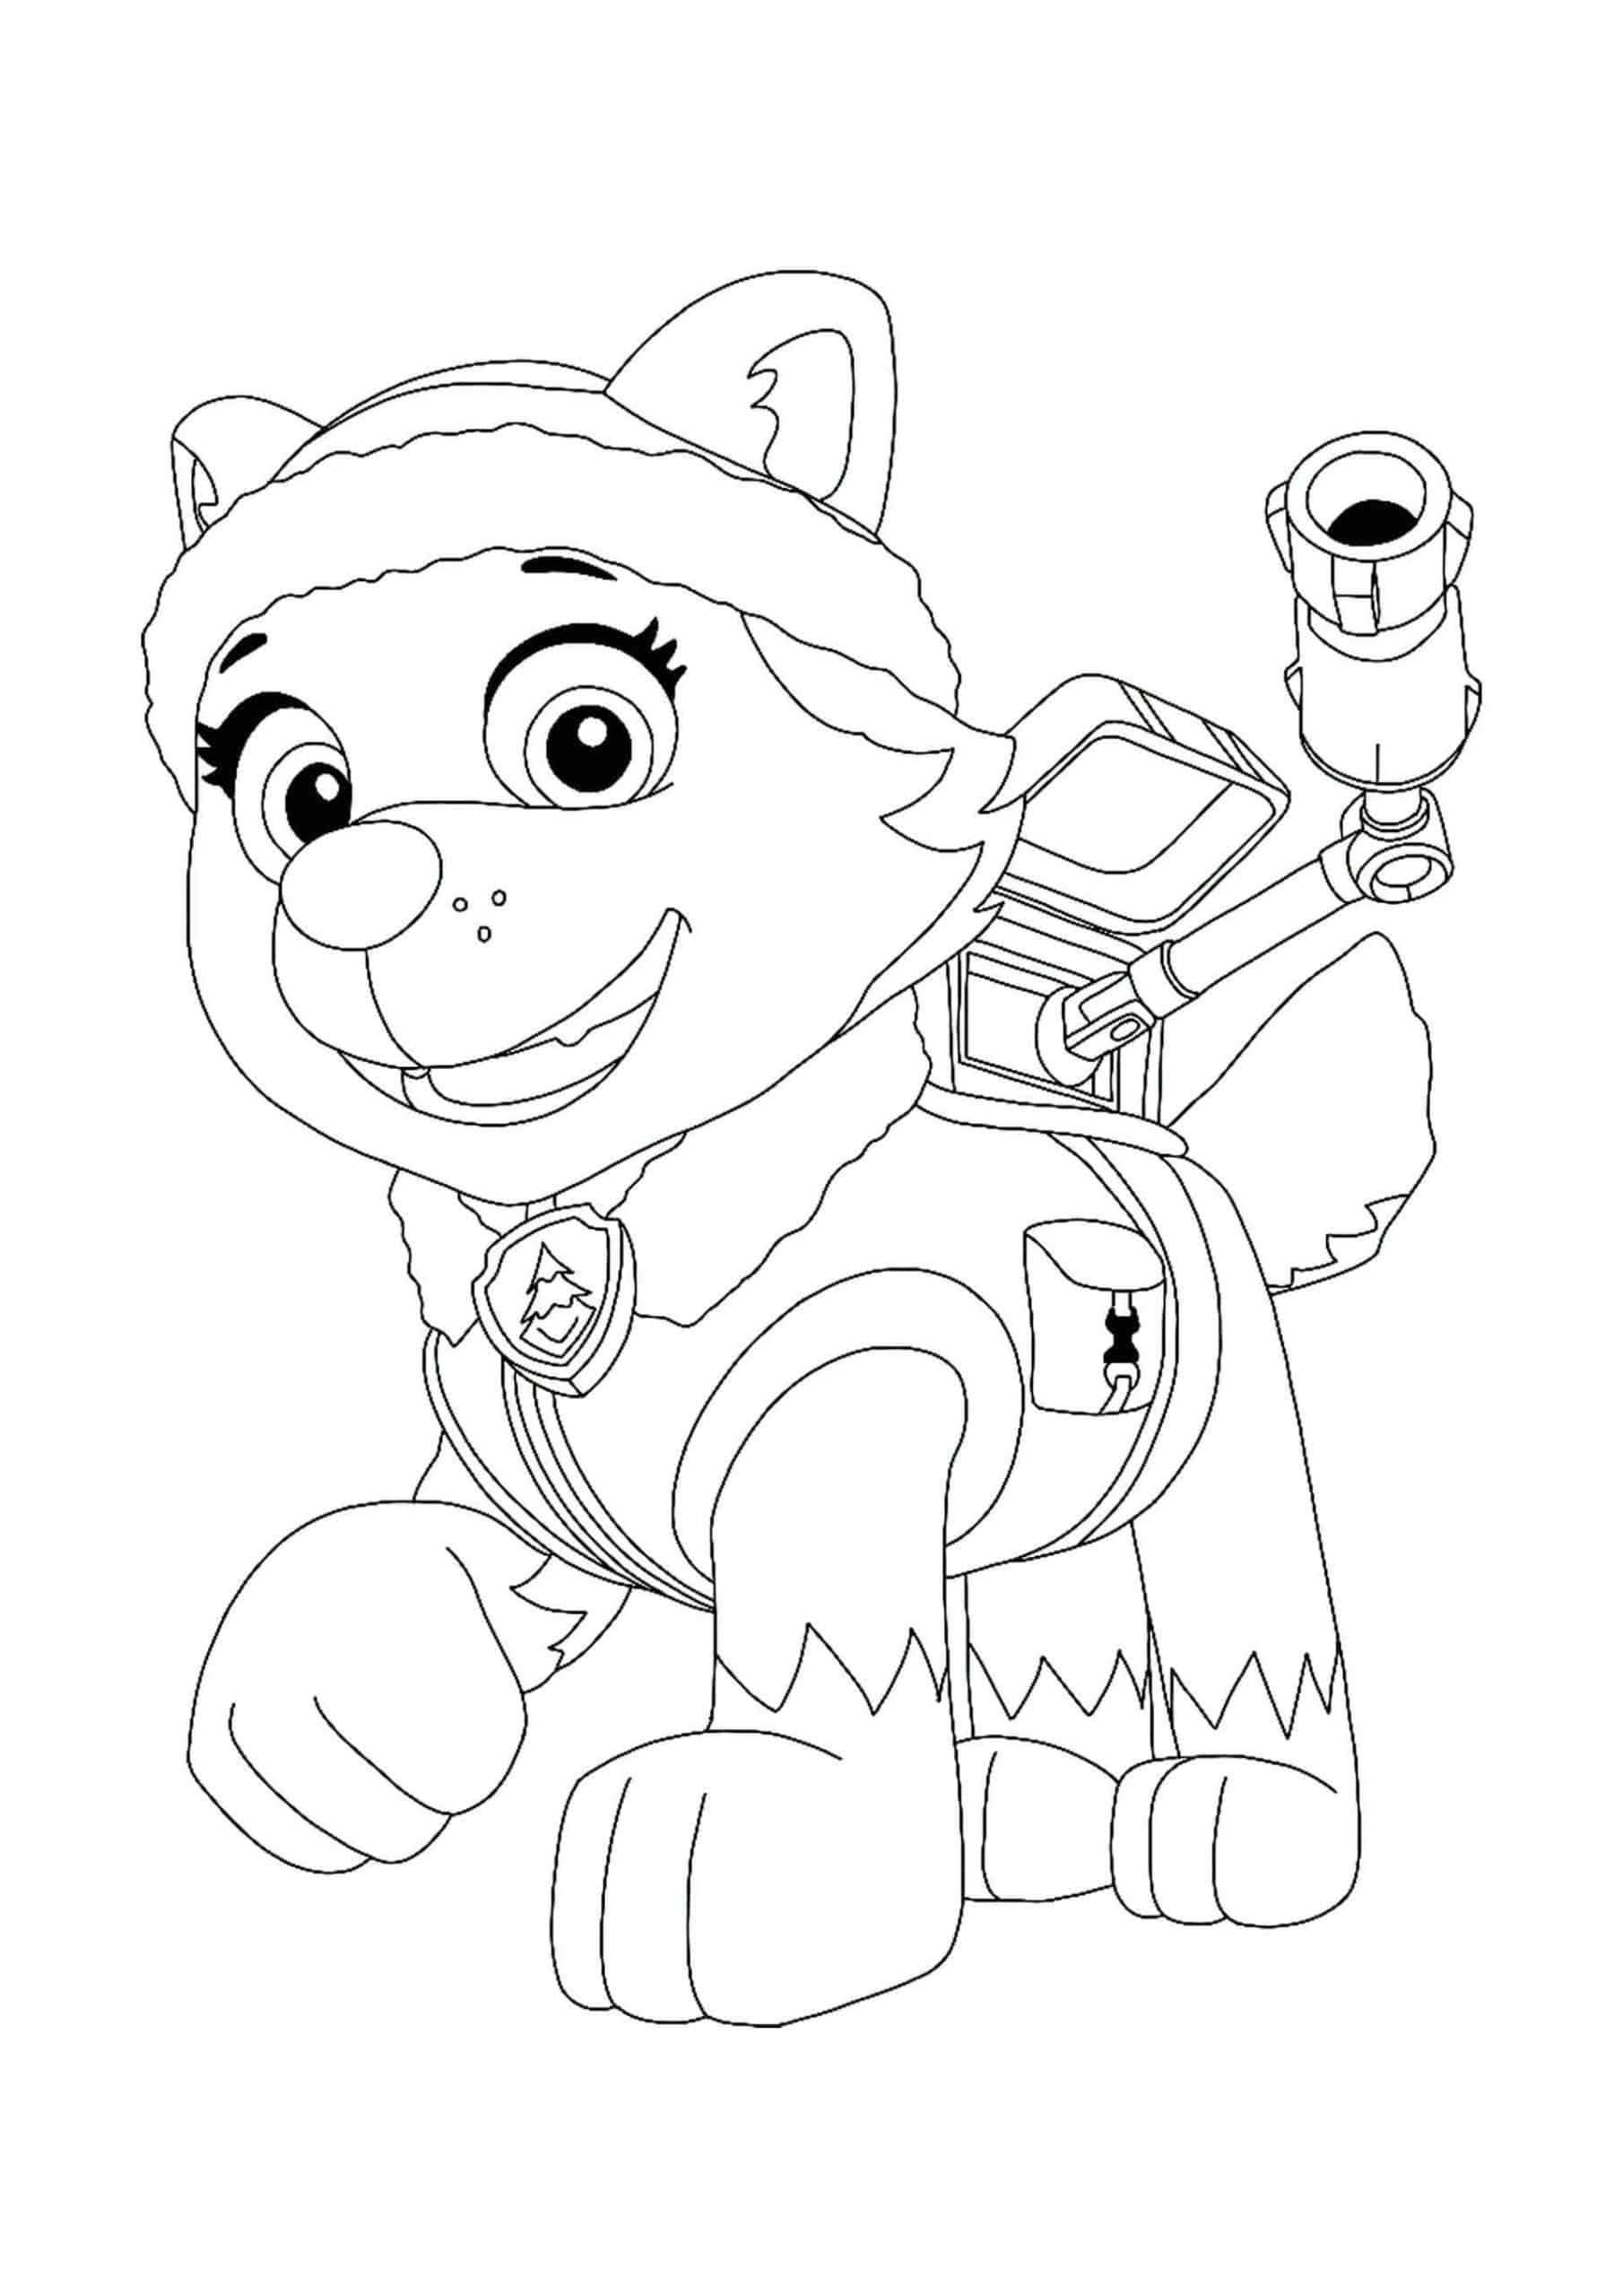 paw-patrol-everest-coloring-page-free-printable-coloring-sheets